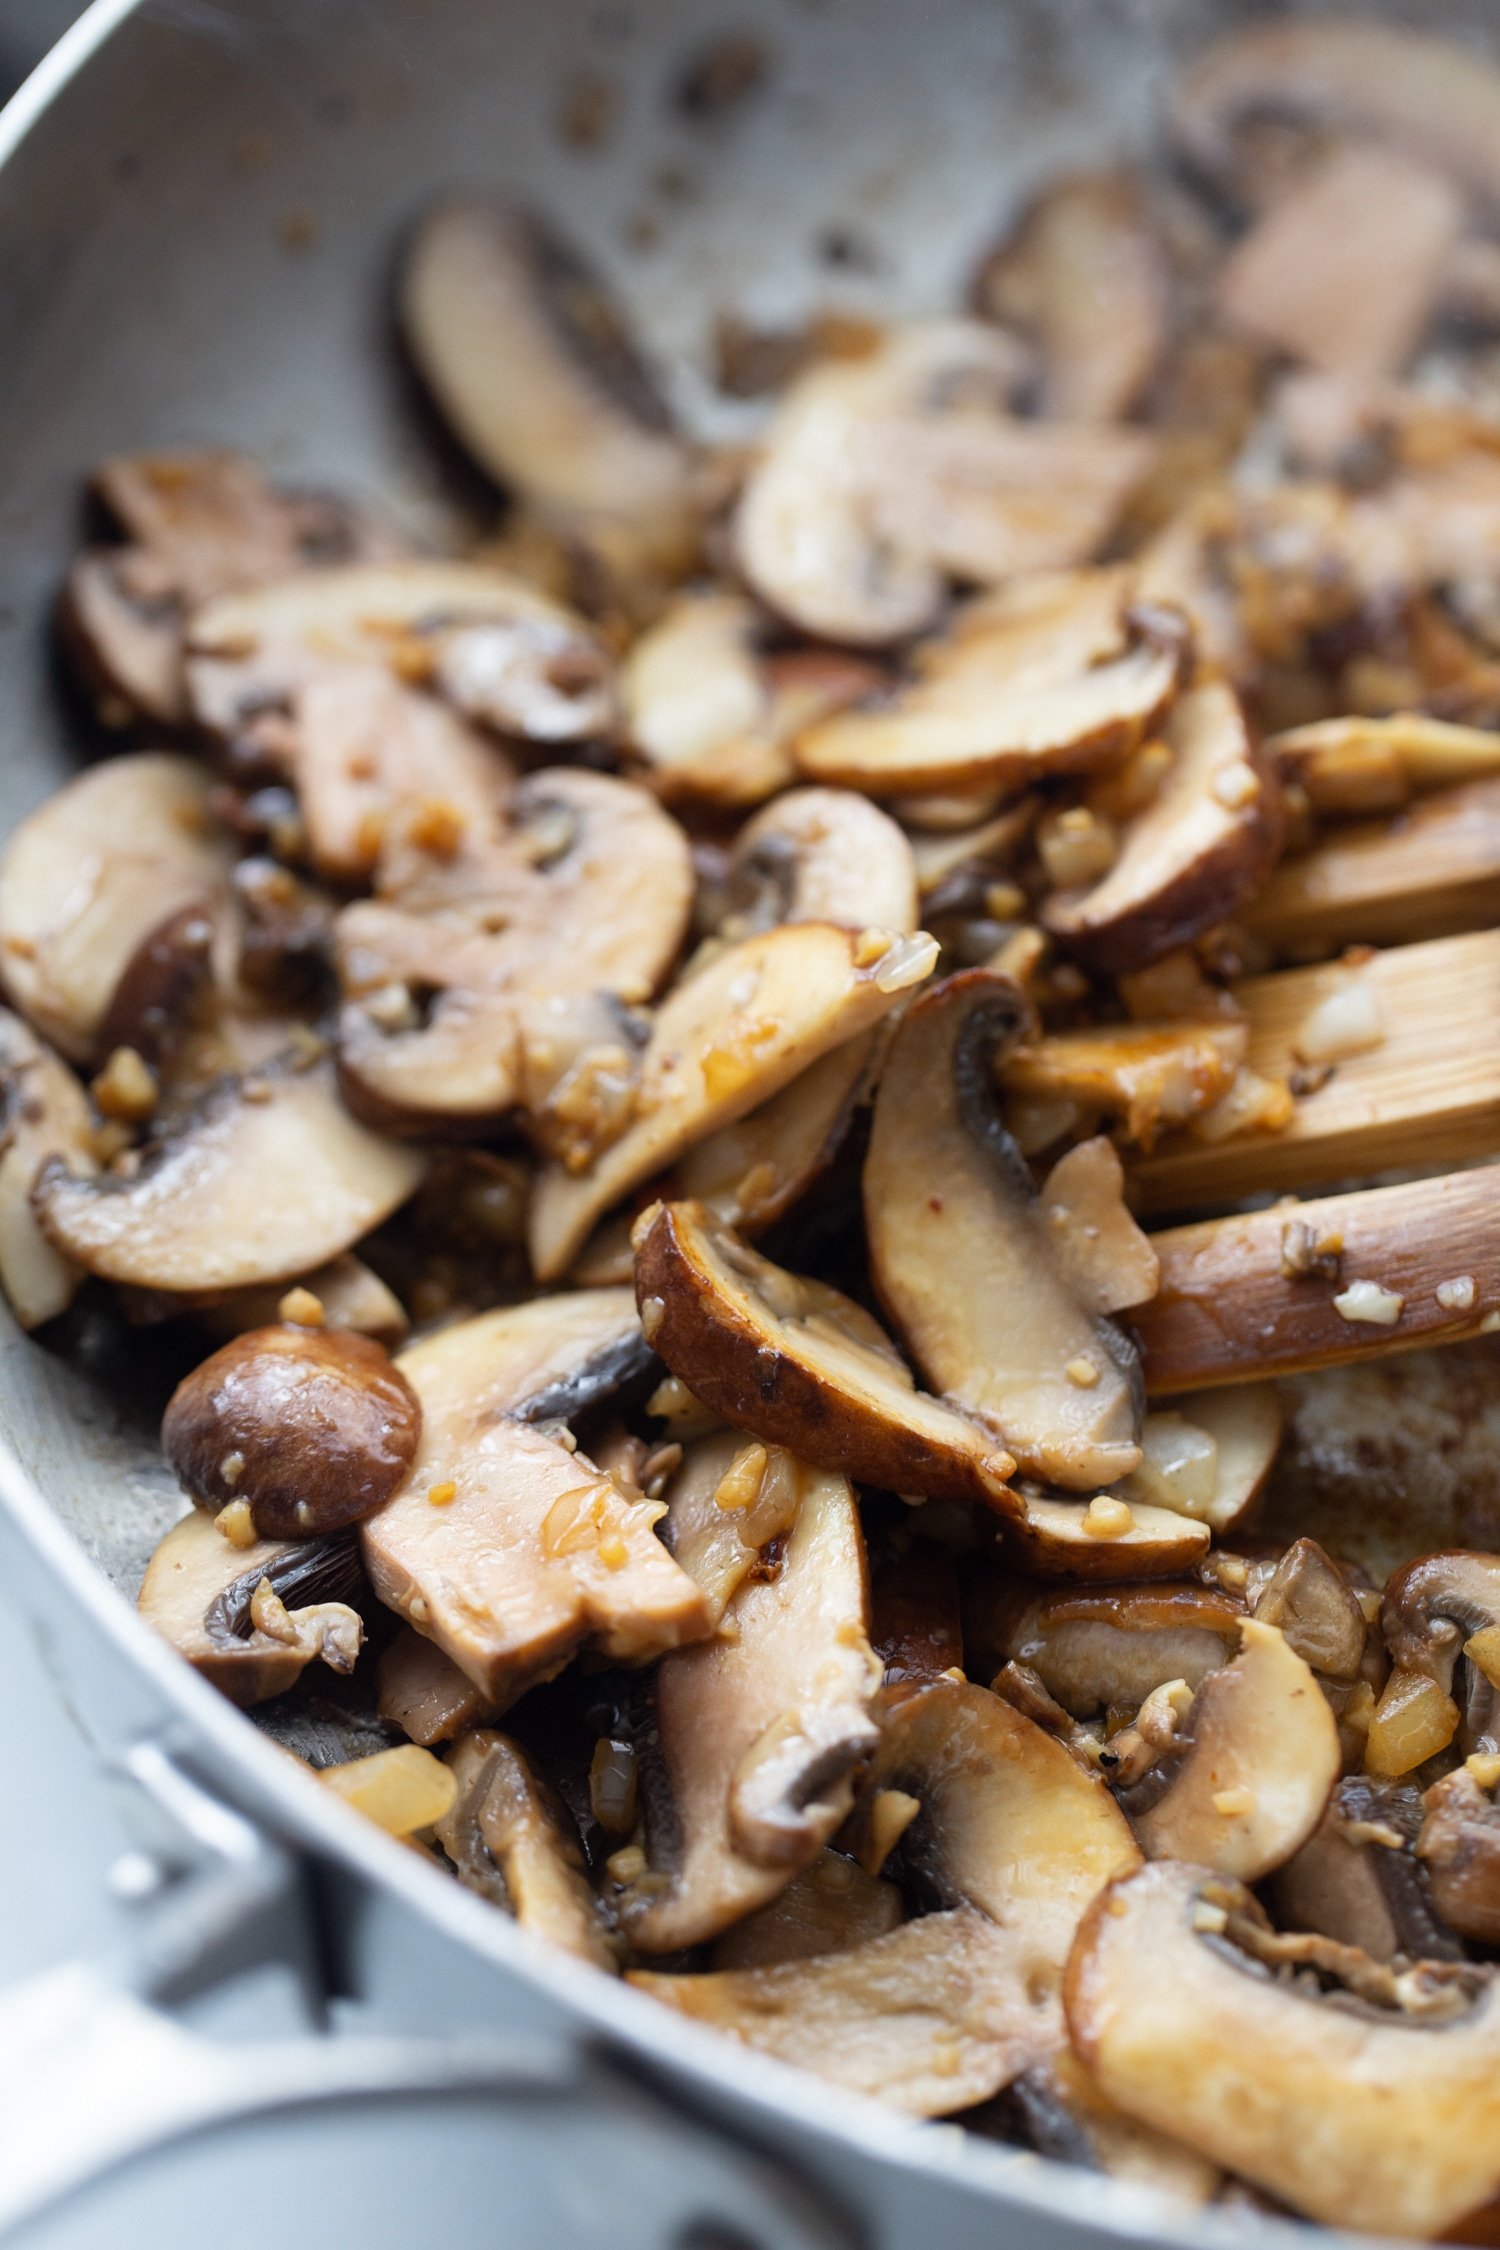 cremini mushrooms sauteeing in a skillet with onions and garlic